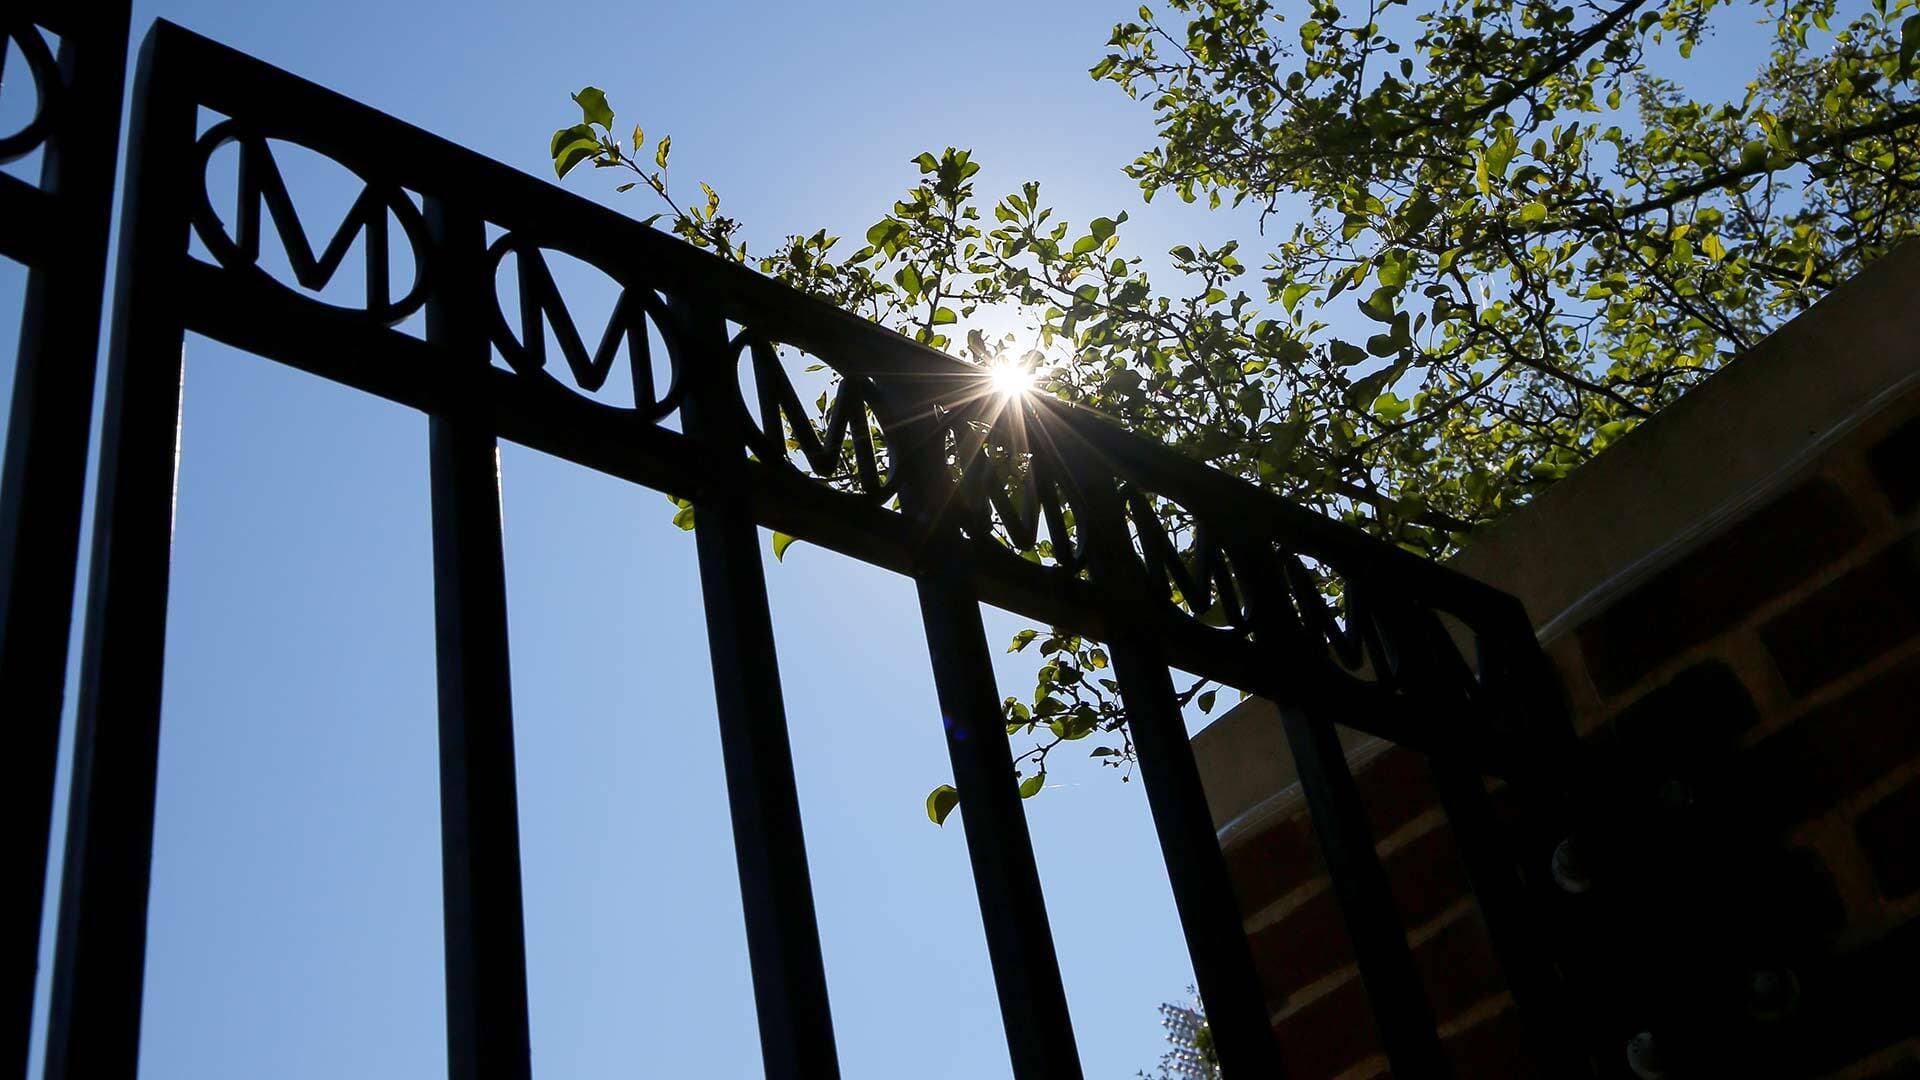 Sun shines through a black gate with M's at the top